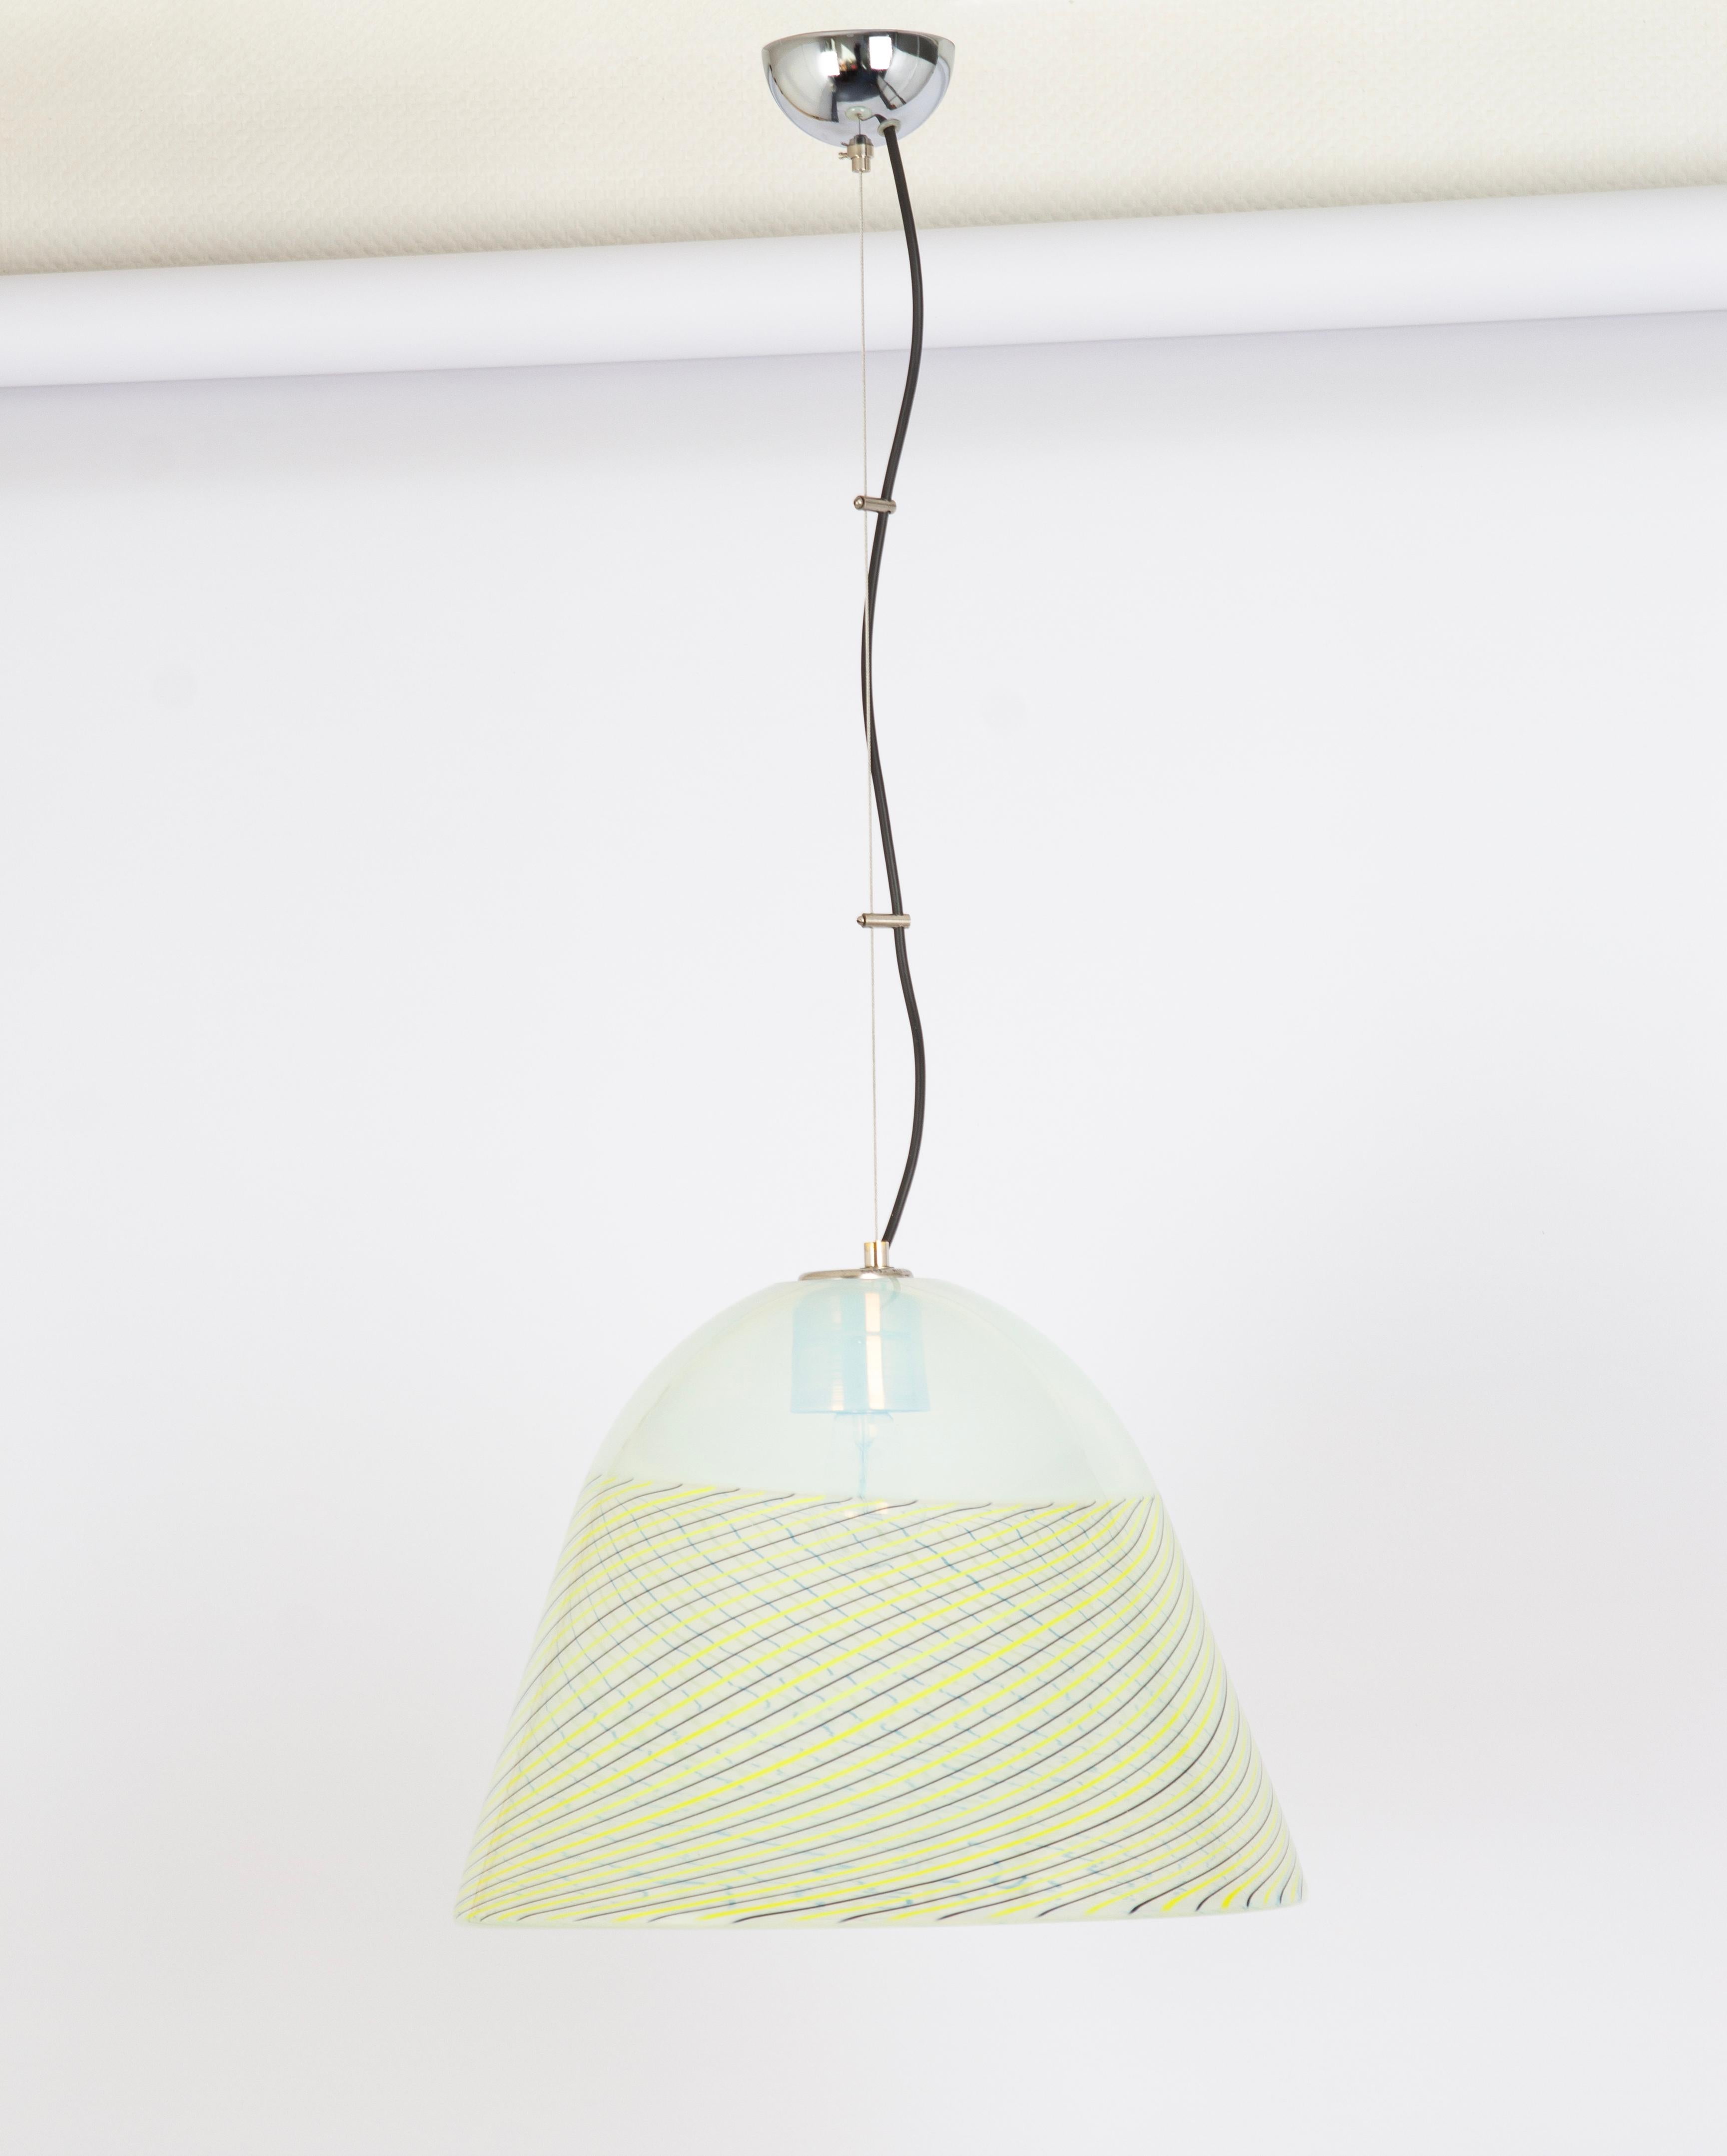 Italian Large Pendant Light in style of Kalmar-Fazzoletto, Italy, 1970s For Sale